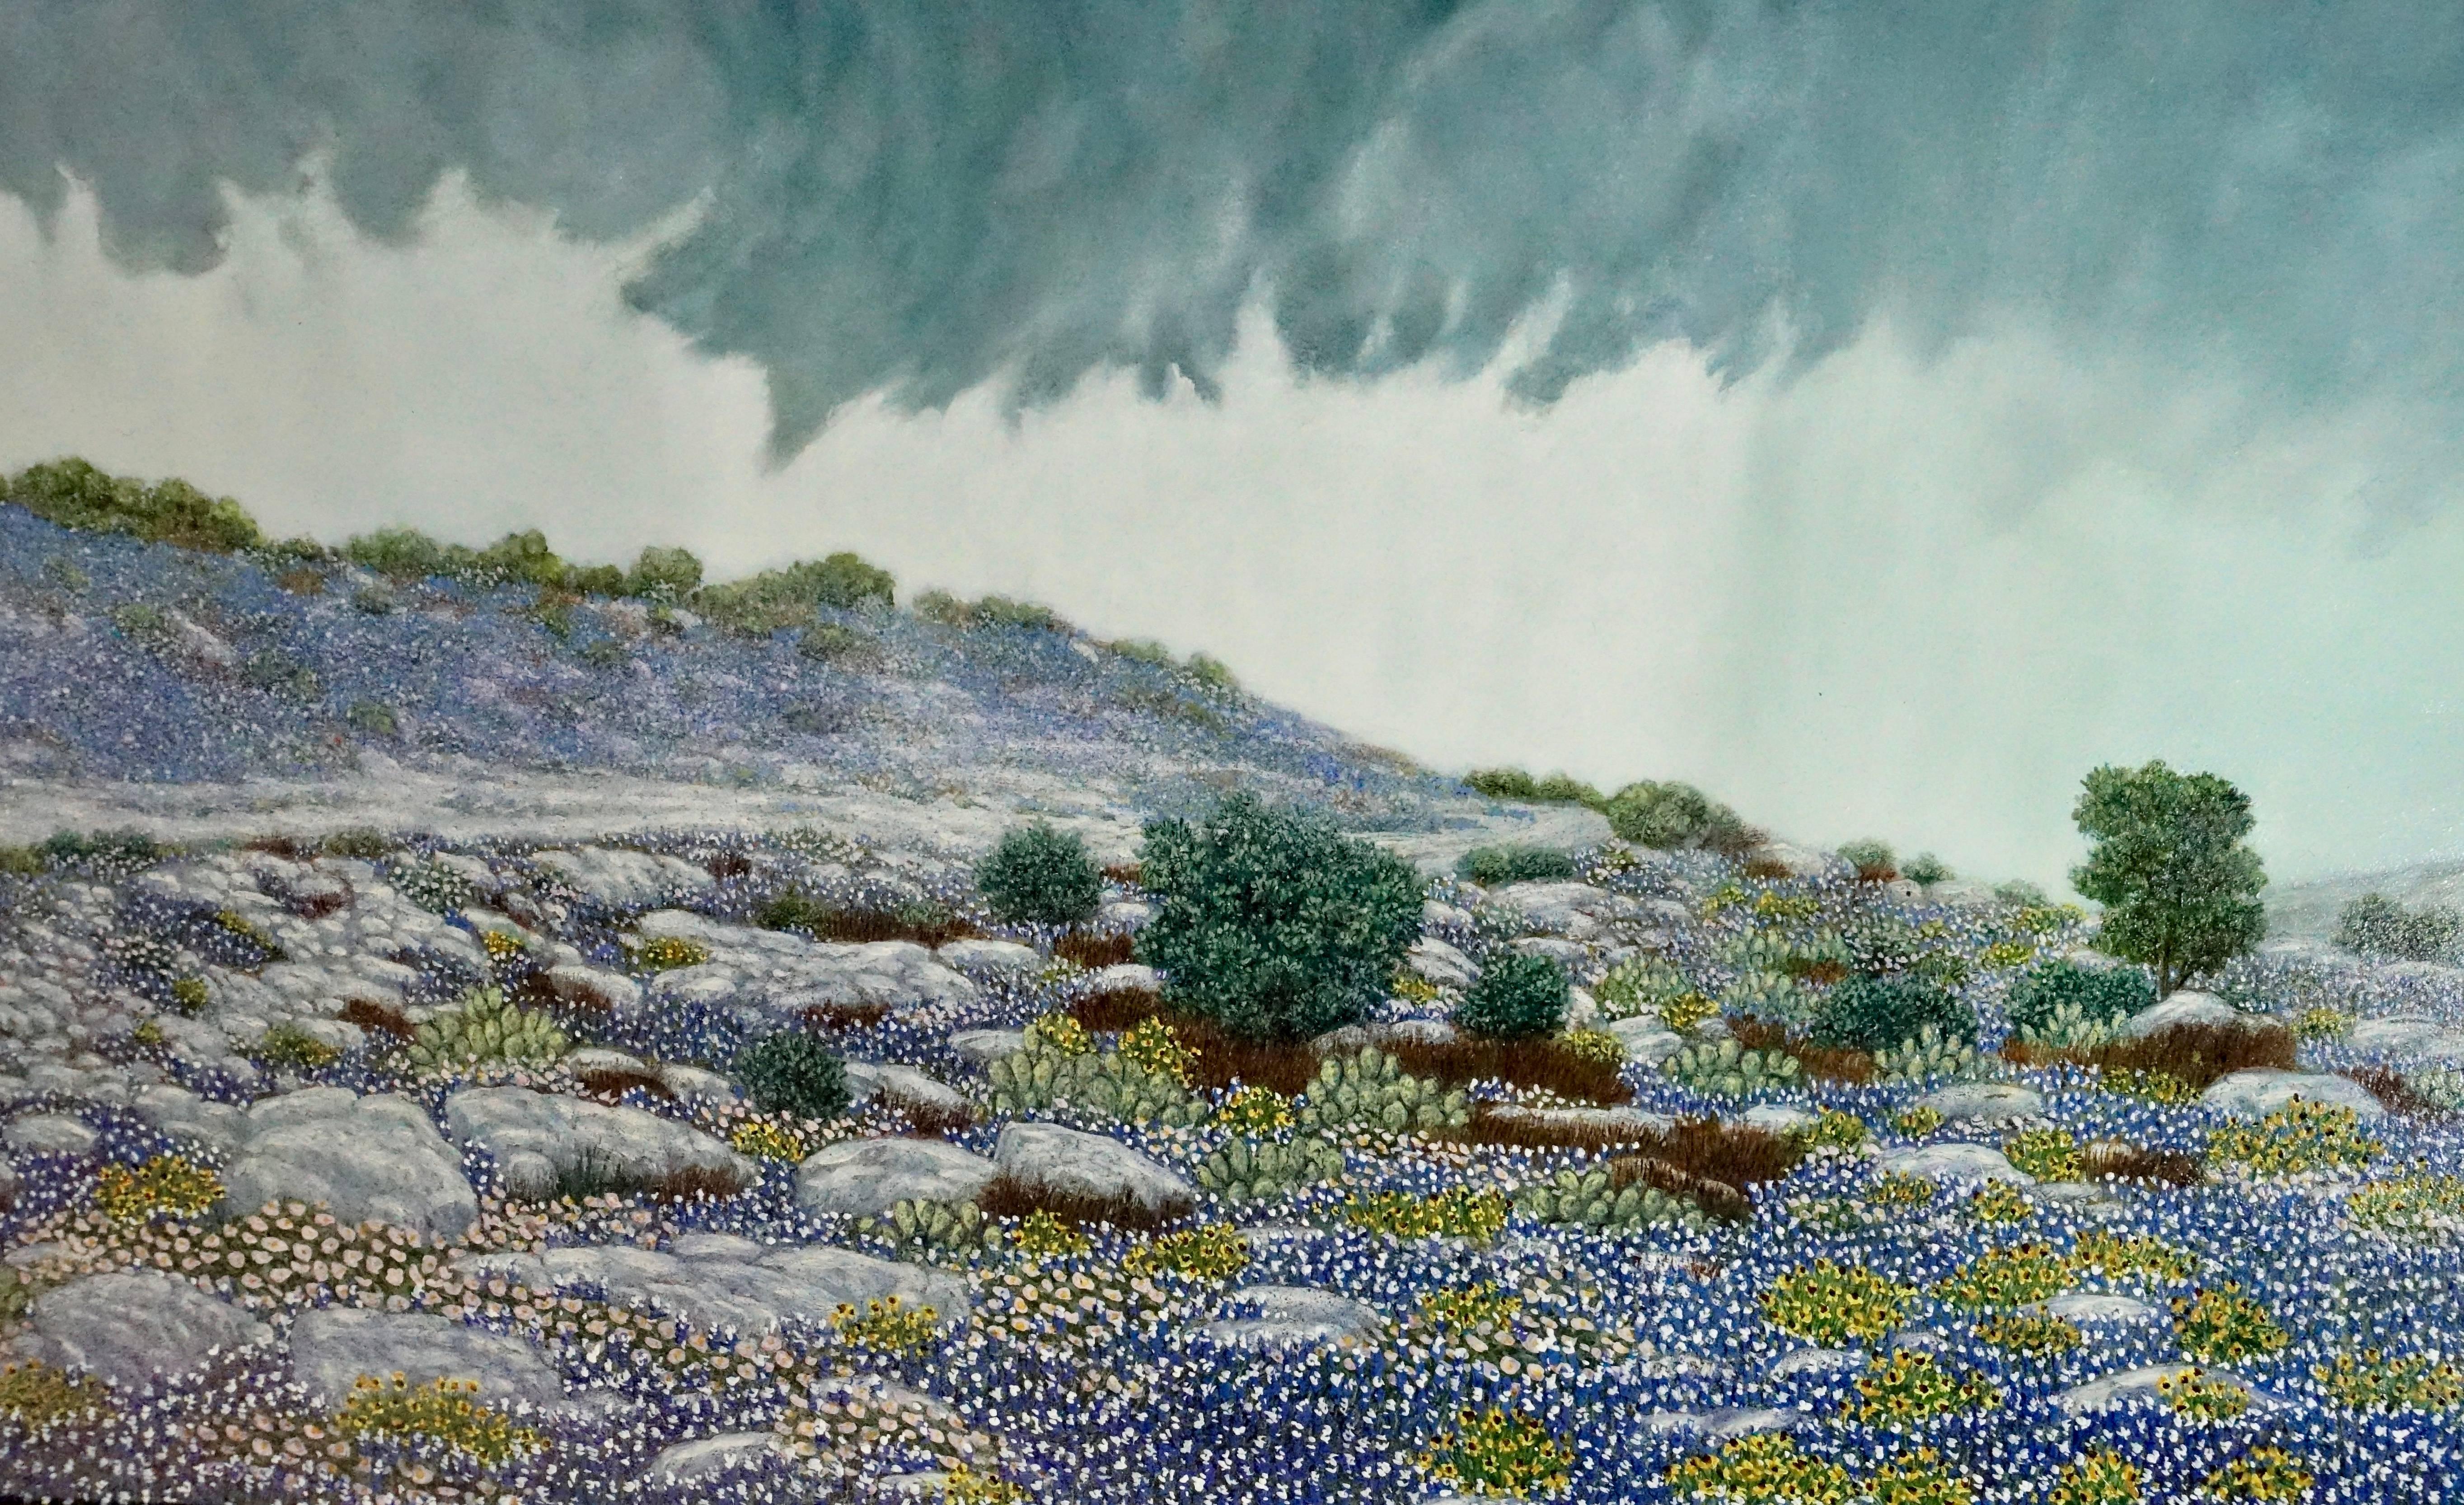 This amazing oil painting portrays a rain wrapped storm breaking out over a blue bonnet climax in the Texas hill country. The shaded landscape is rendered perfectly to accentuate the effect and atmosphere of the impending storm. The fine detail and